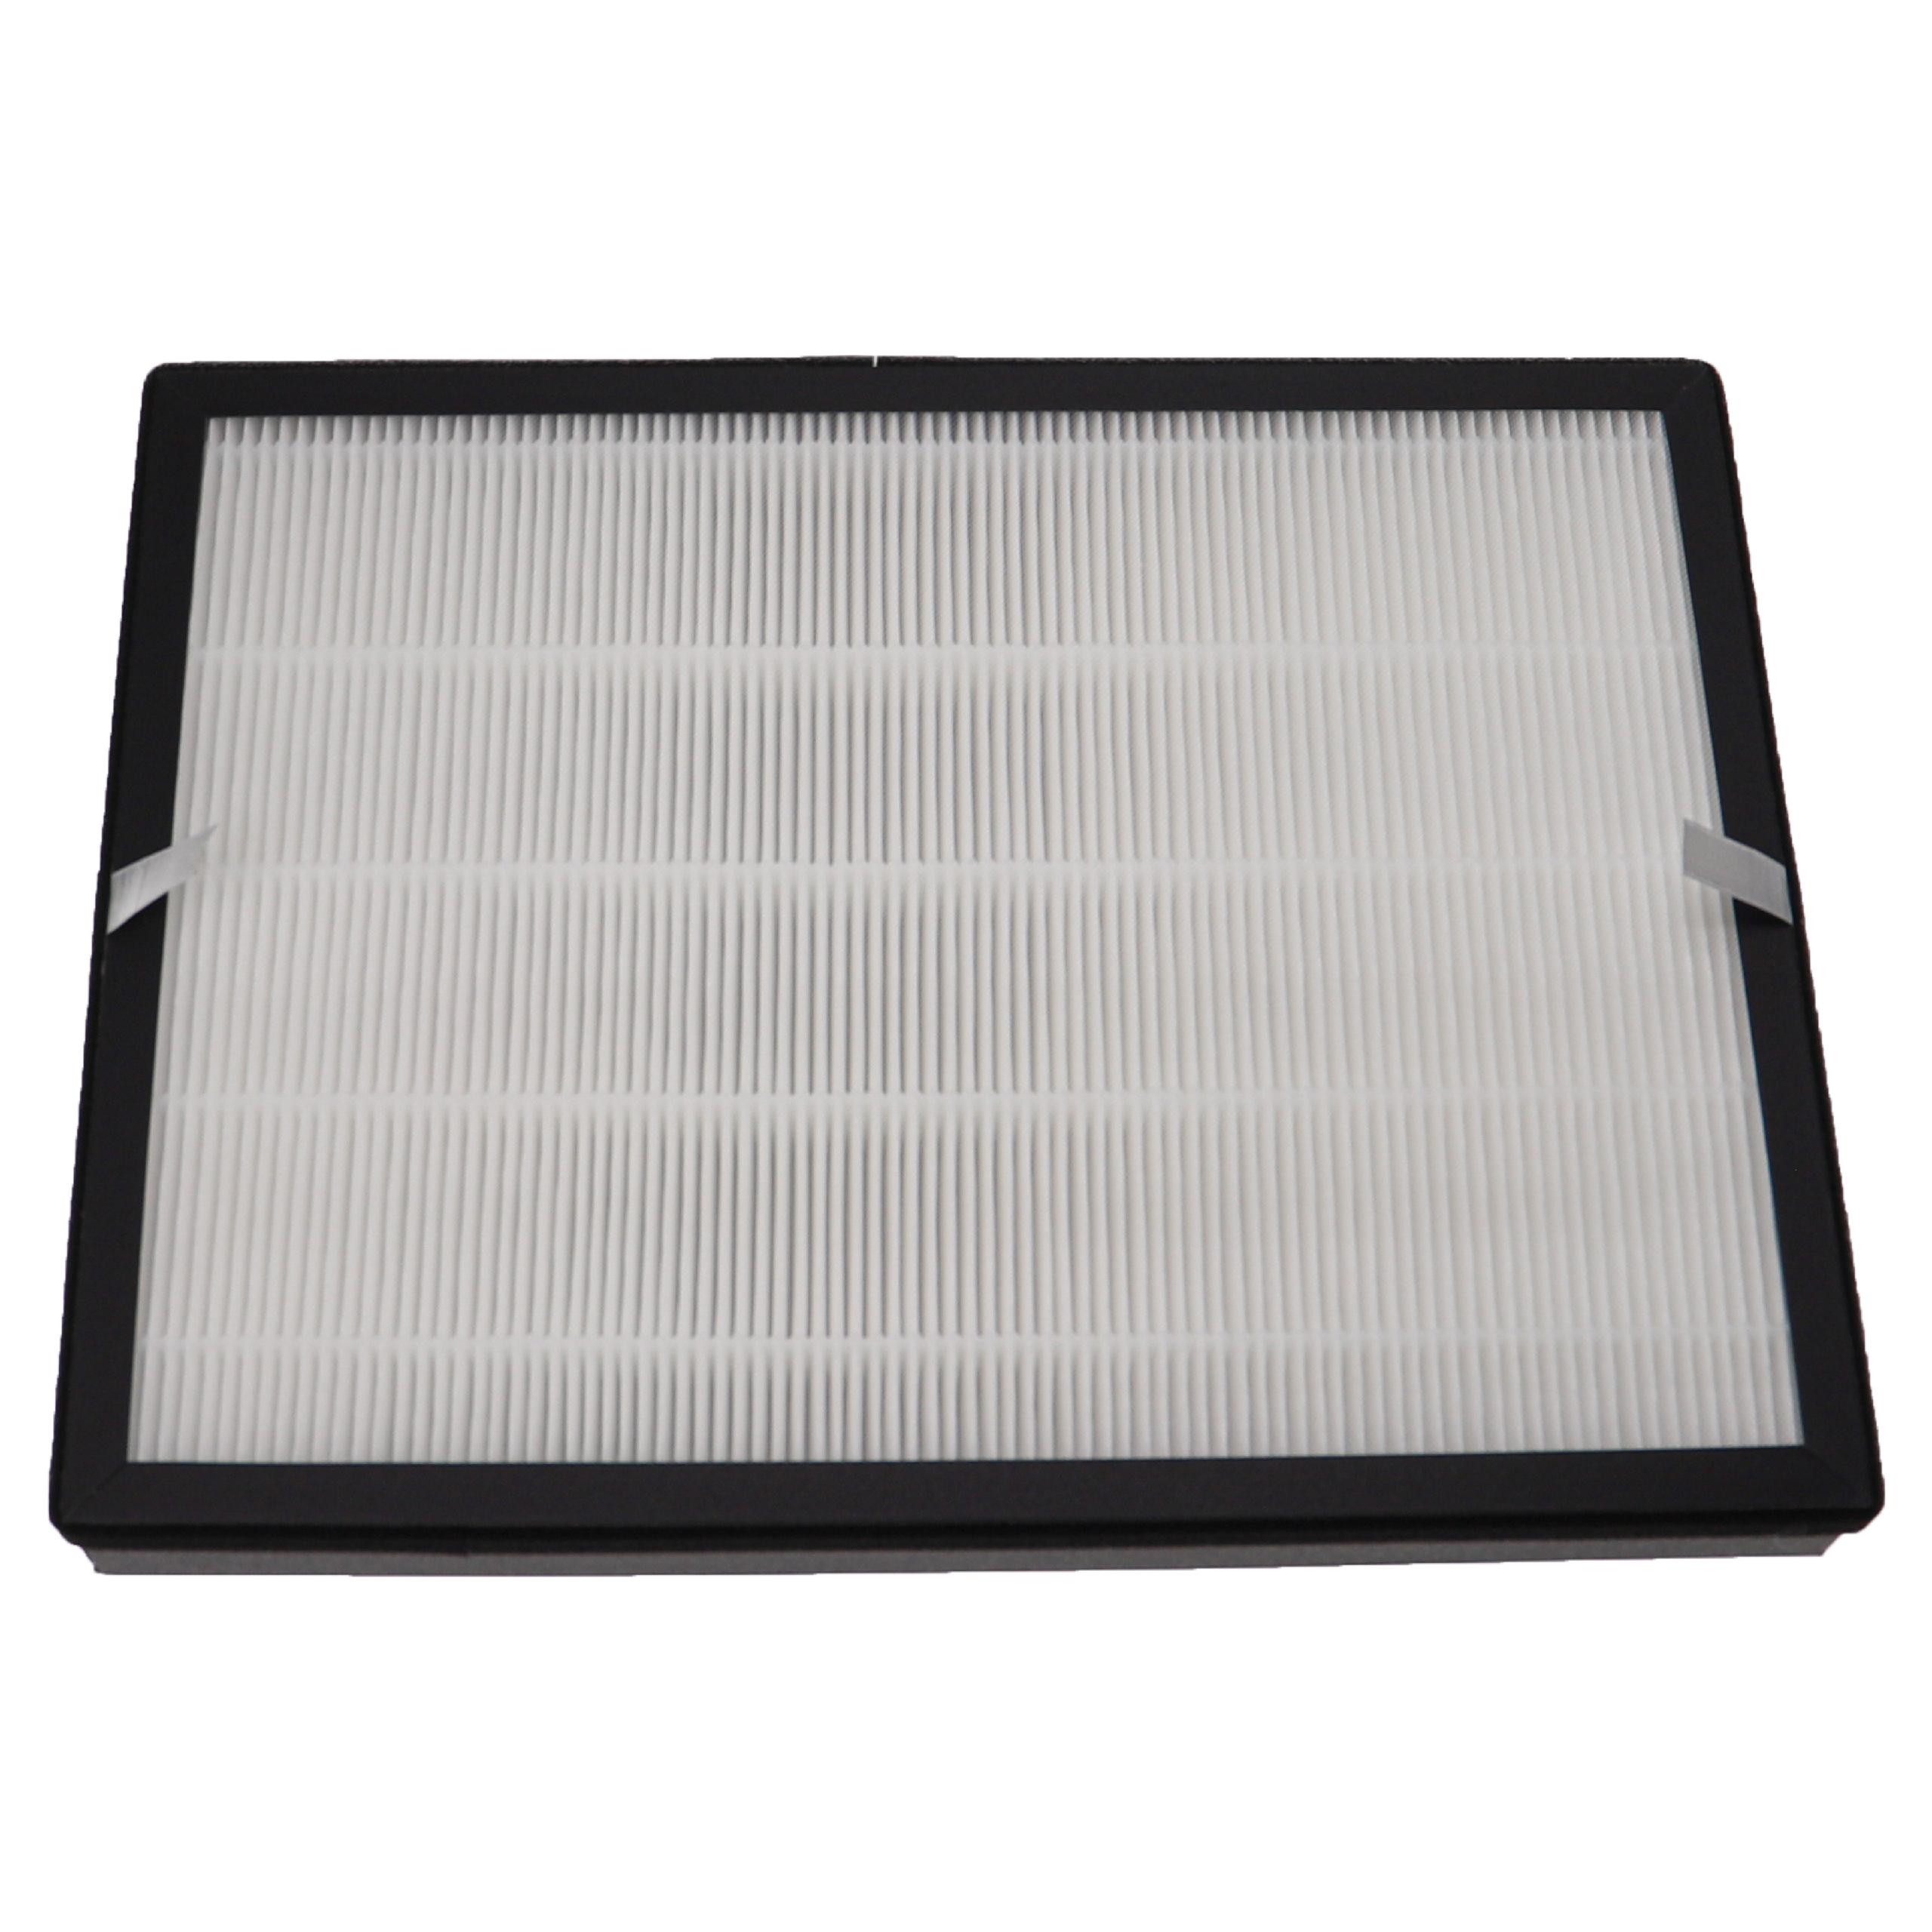 Filter for i@home Fangqi TKJ270F-A1 Air Purifier - Pre Filter + HEPA + Activated Carbon